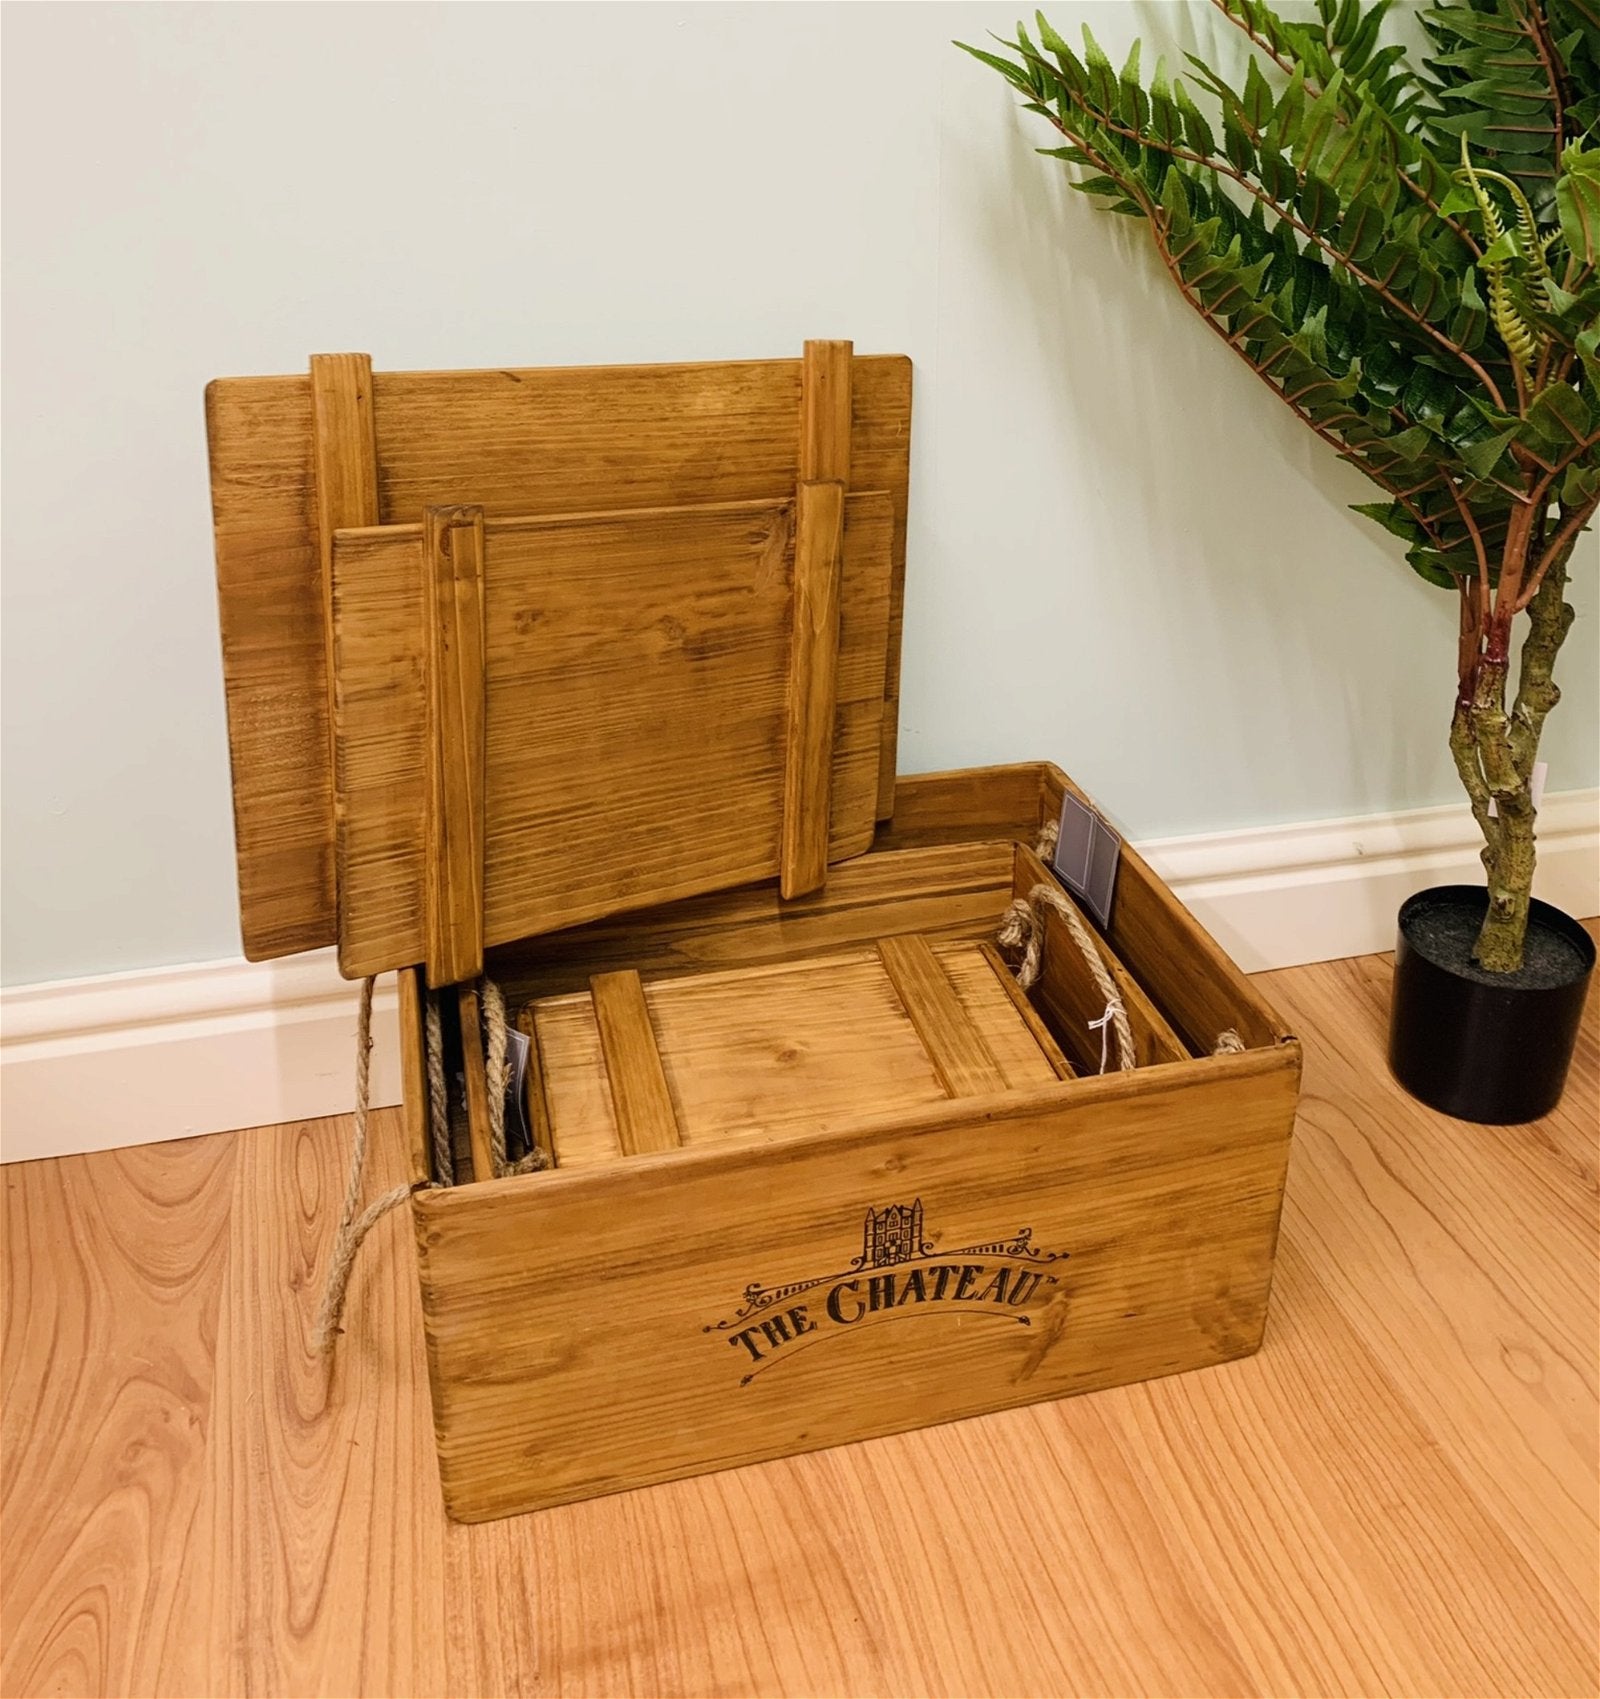 Set Of 3 The Chateau Rustic Vintage Crates Willow and Wine